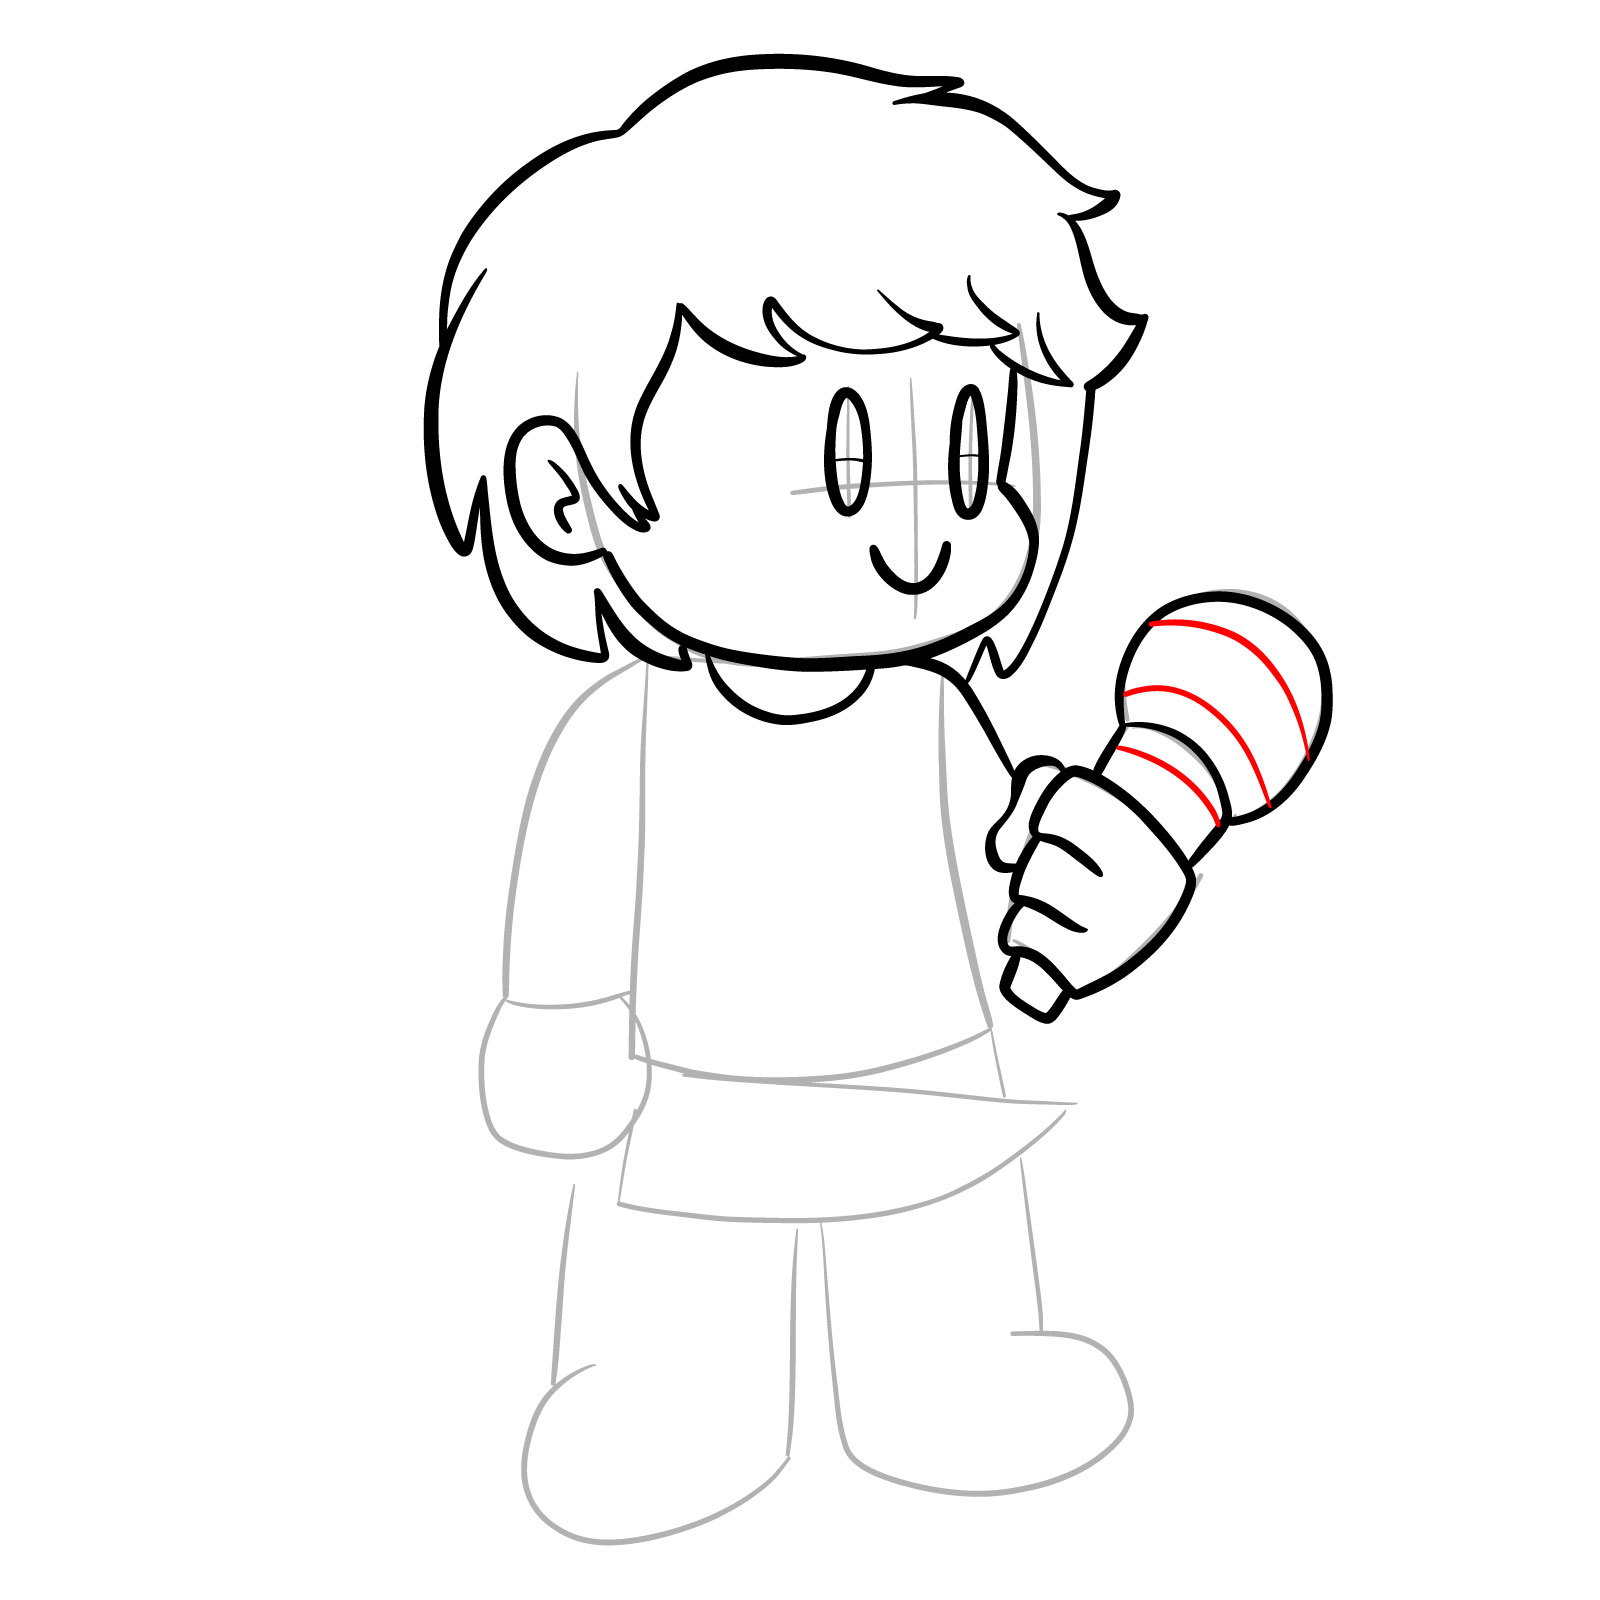 How to draw Chara from FNF - step 17